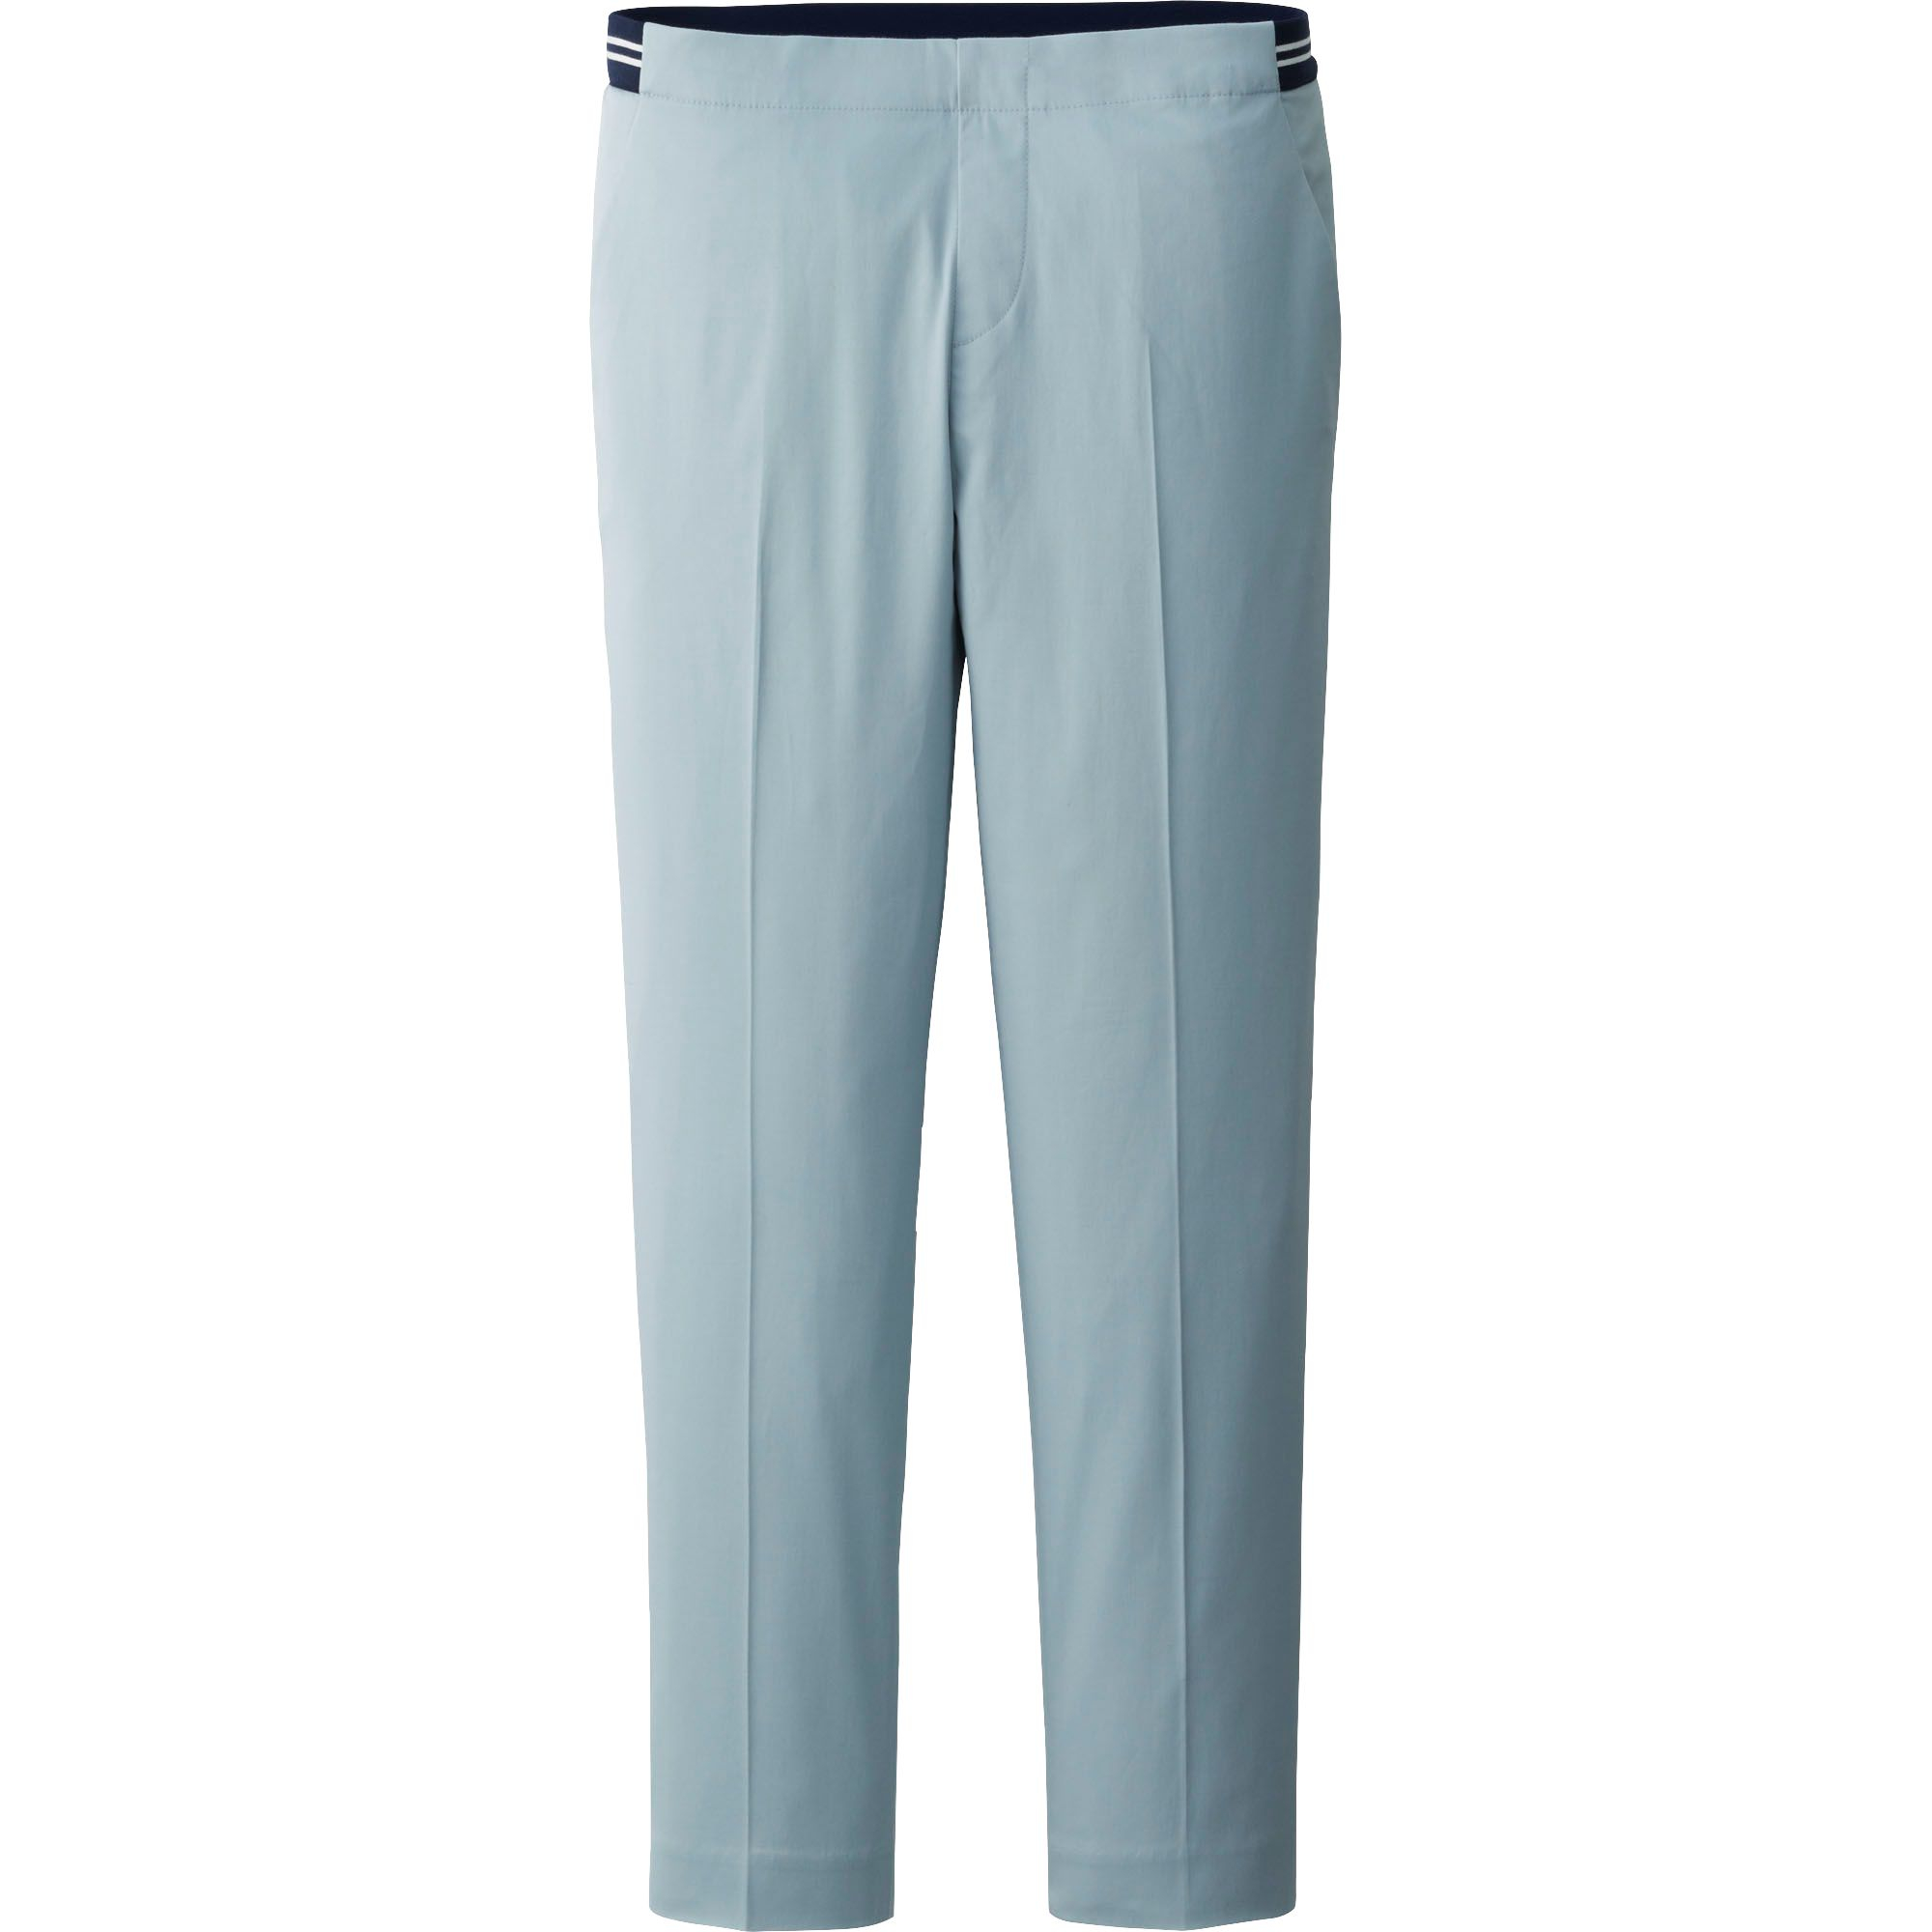 Uniqlo Satin Ankle Length Trousers in Blue (LIGHT BLUE) | Lyst